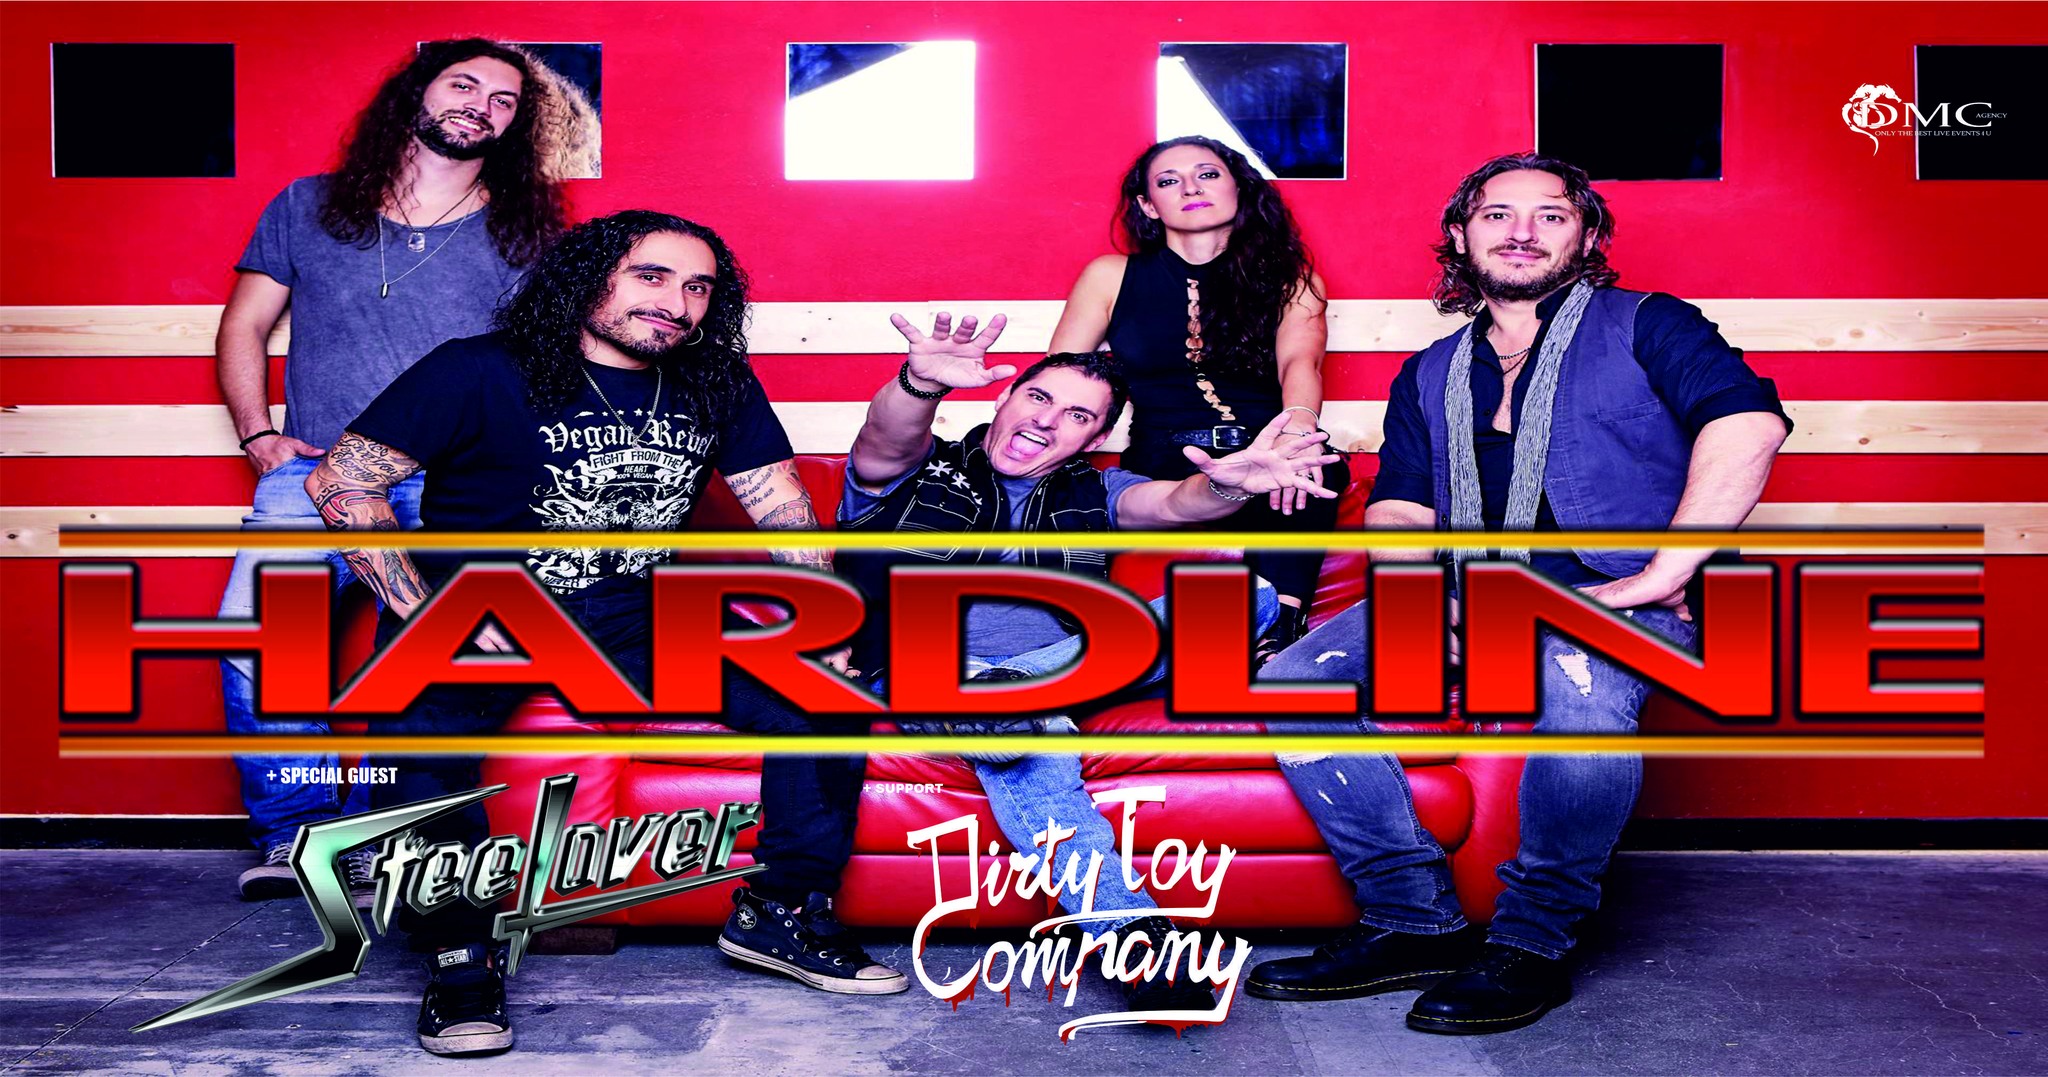 HARDLINE + special guest STEELOVER & support Dirty Toy Company